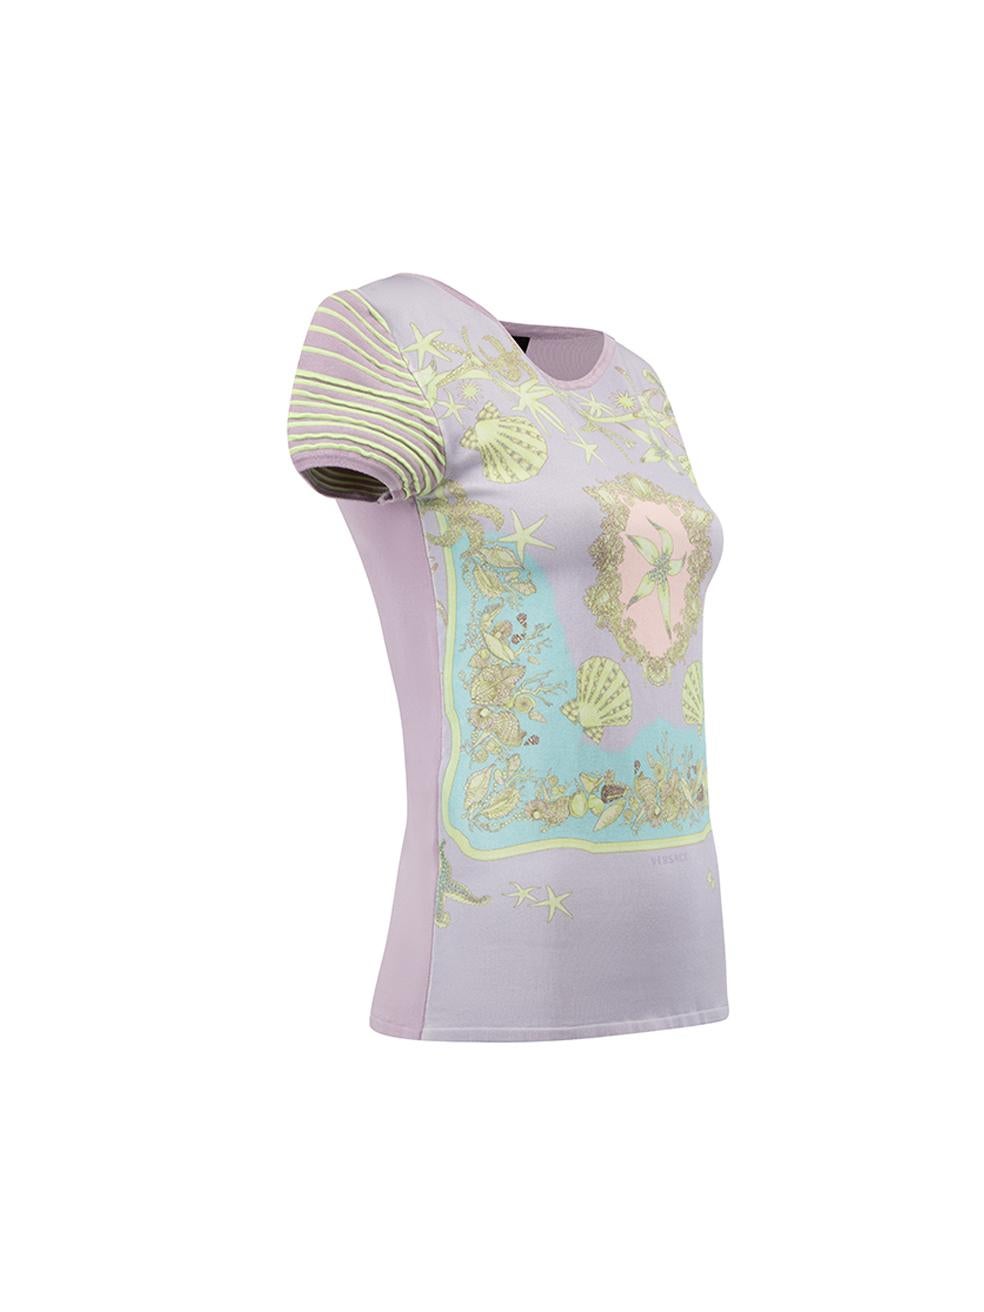 CONDITION is Very good. Hardly any visible wear to top is evident on this used Versace designer resale item.
 
 Details
  Lilac tone
 Viscose
 T shirt
 Stretchy fit
 Round neckline
 Shell graphic print pattern
 Contrast neon yellow stripe trimmings